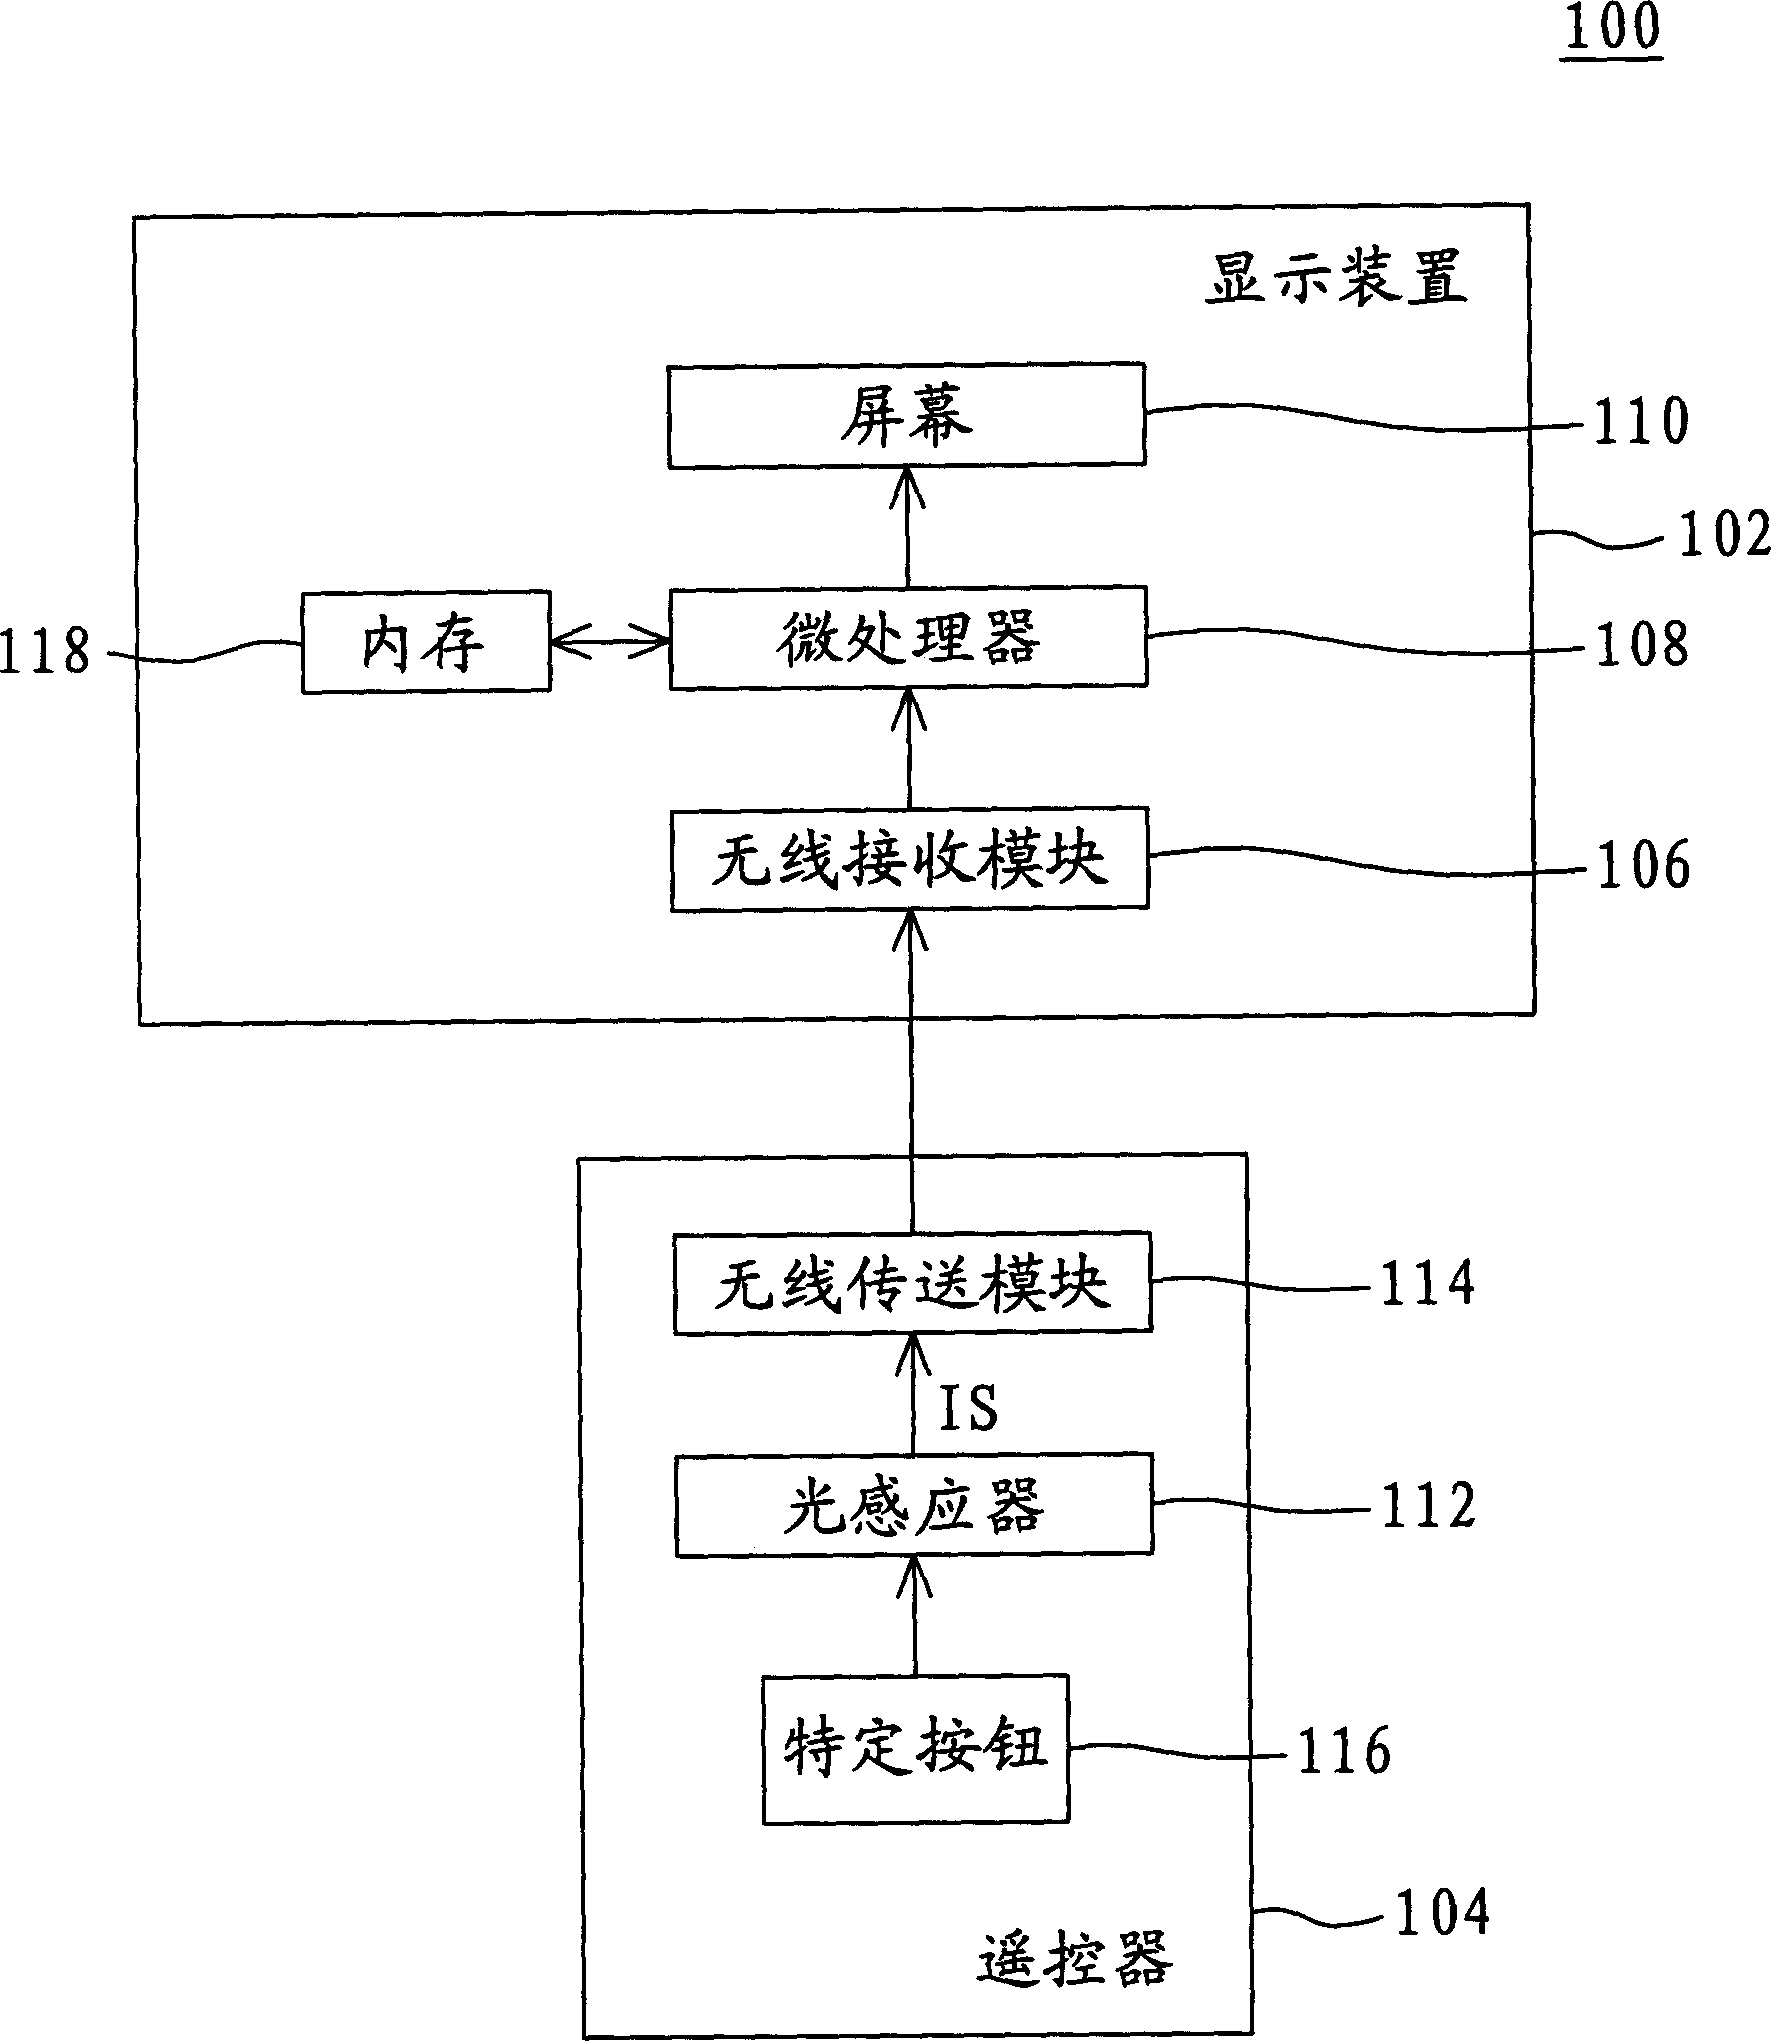 Display system and method capable of automatically adjusting display brightness